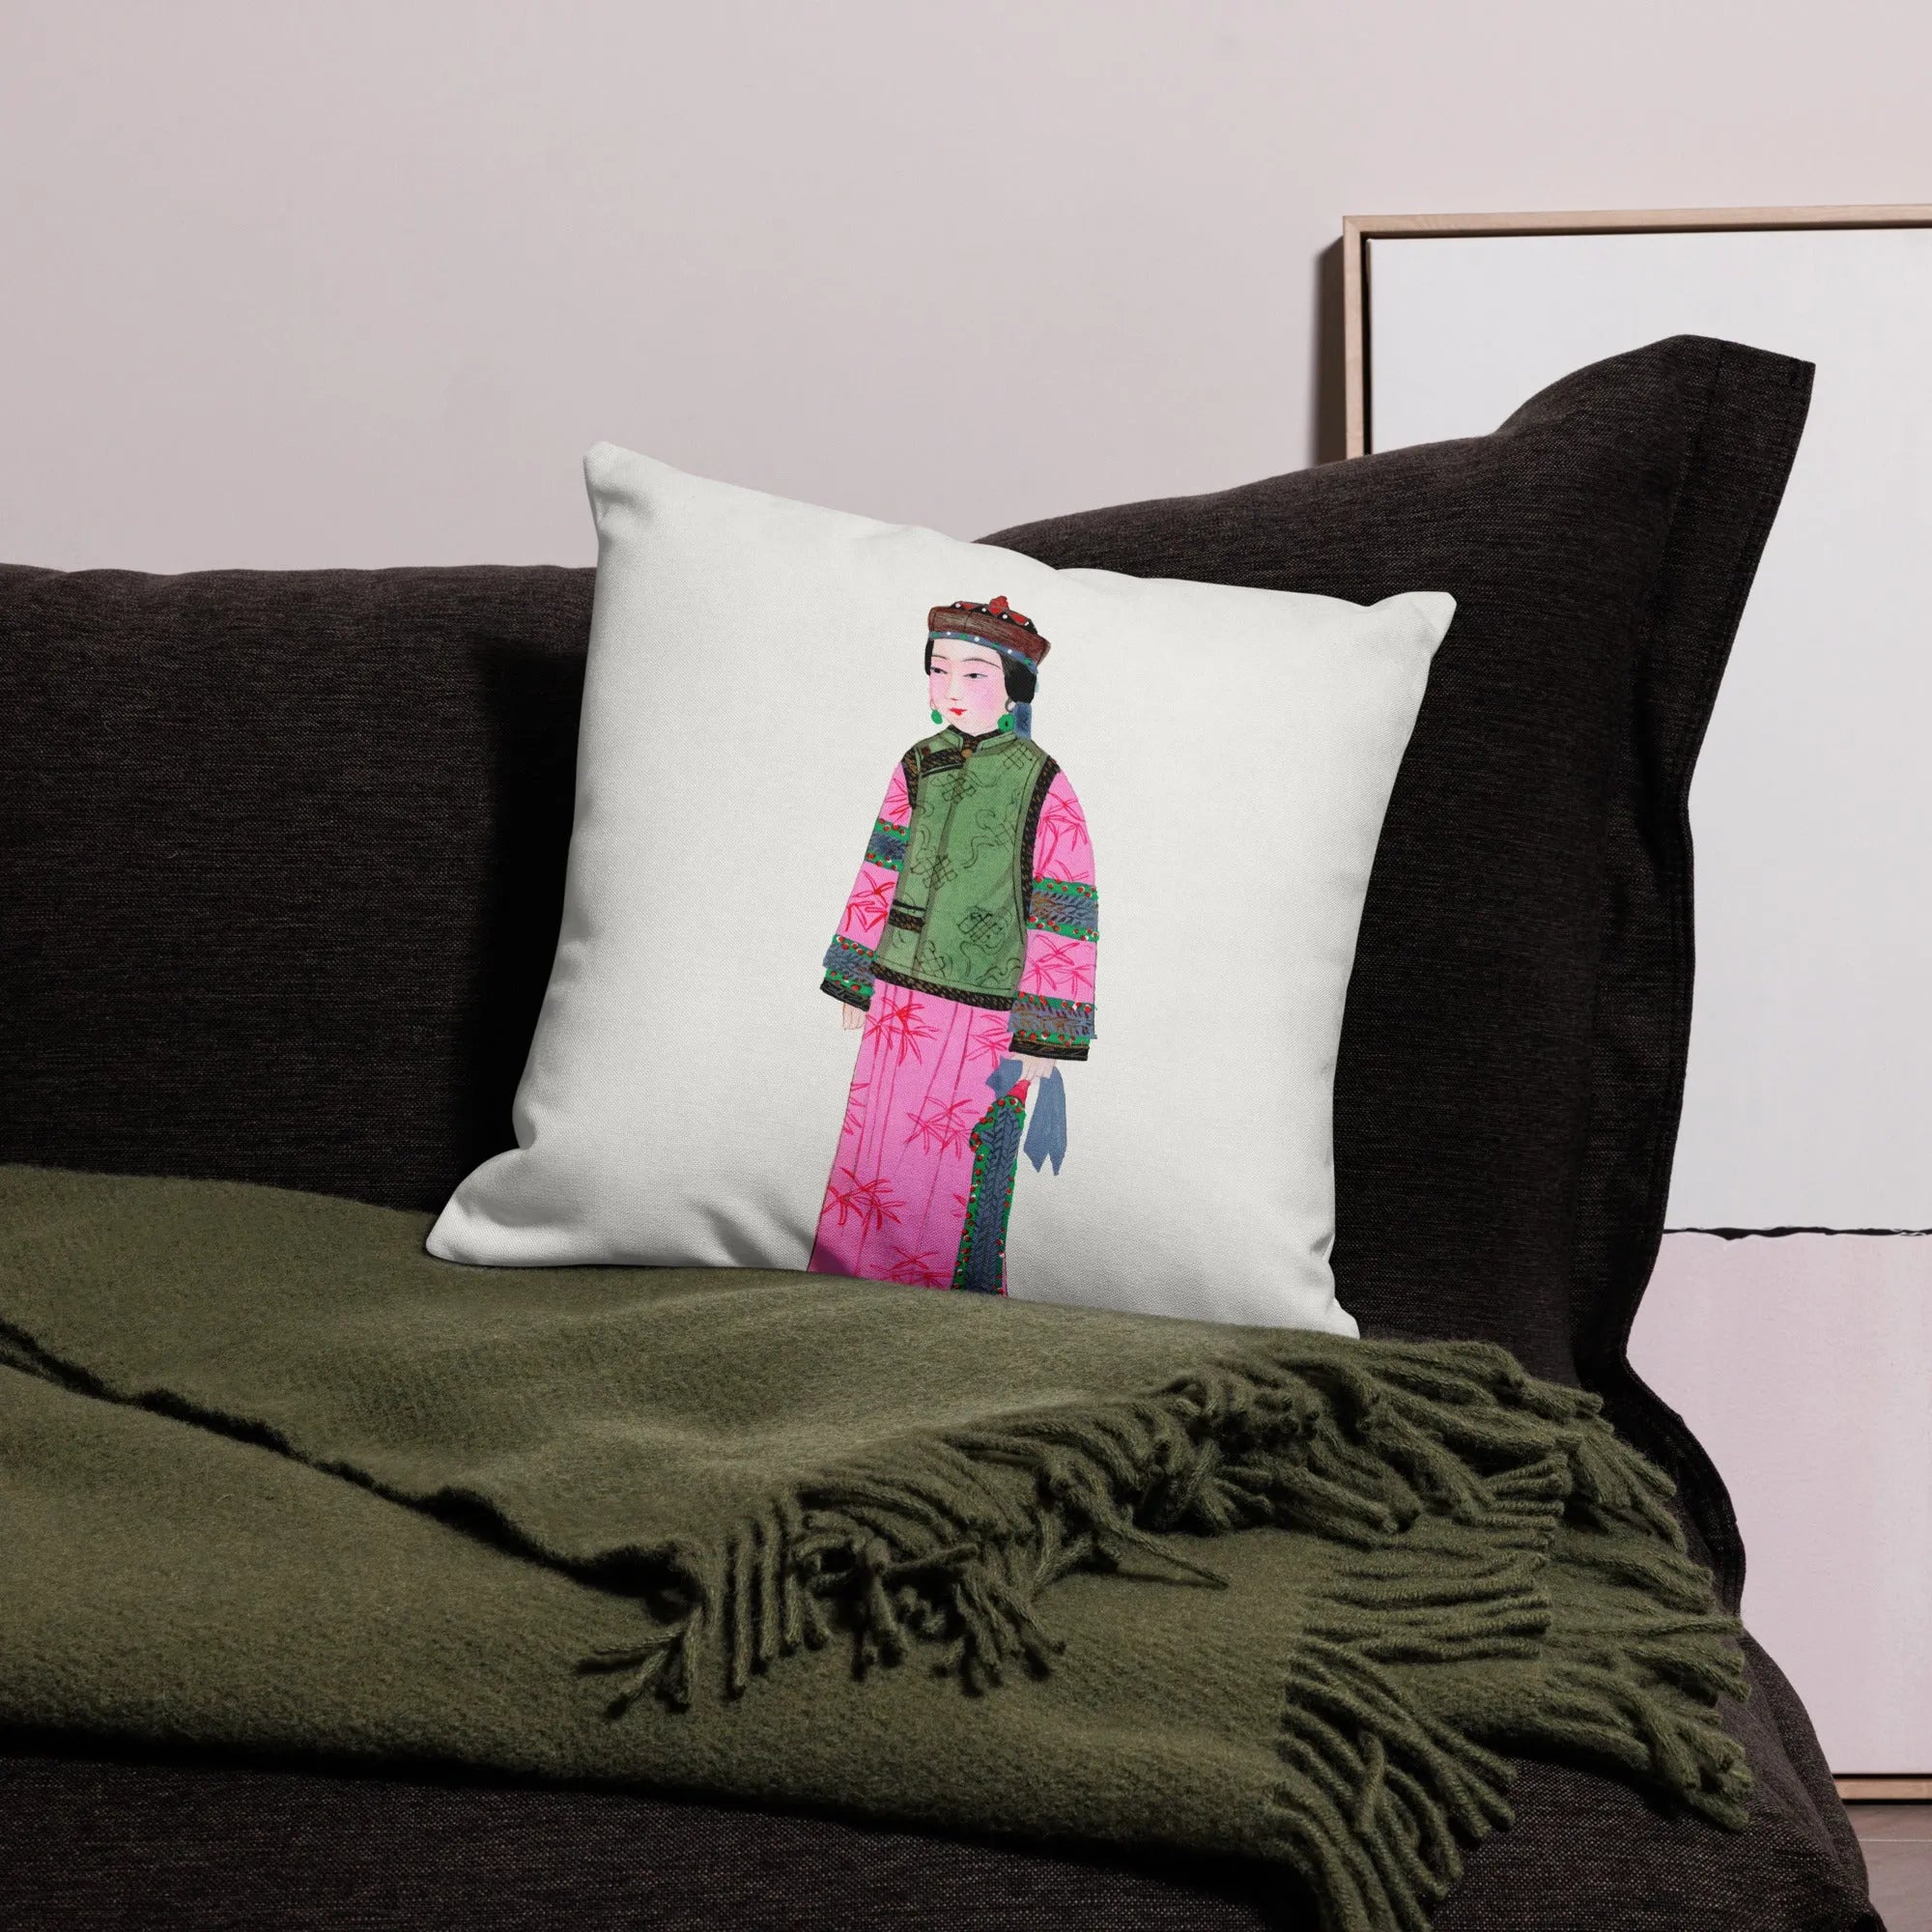 Chinese Noblewoman In Winter Cushion - Throw Pillows - Aesthetic Art